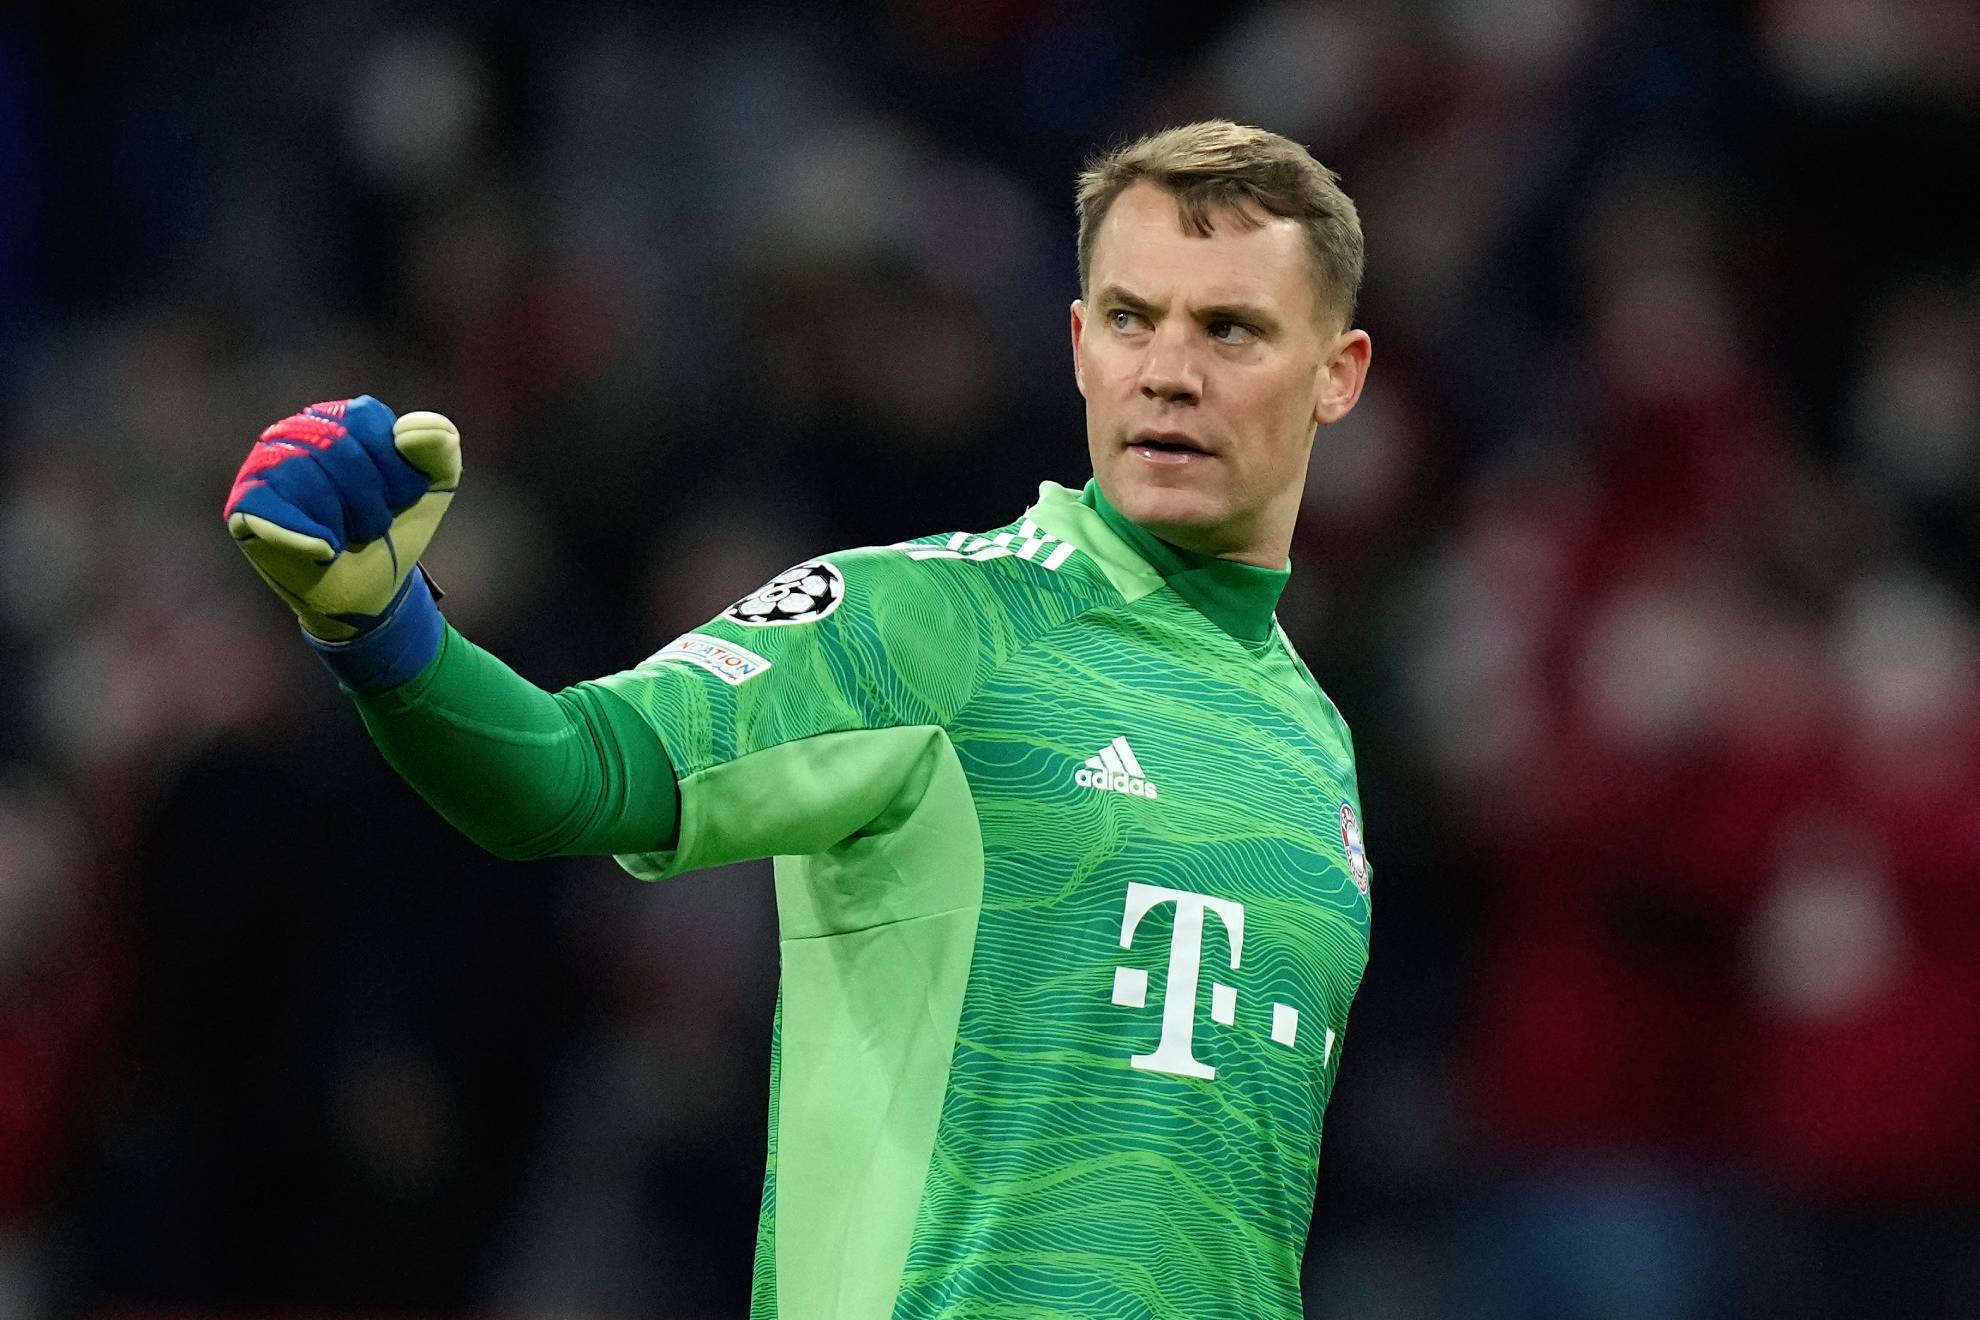 Manuel Neuer reacts during the Champions League match between Bayern and Salzburg